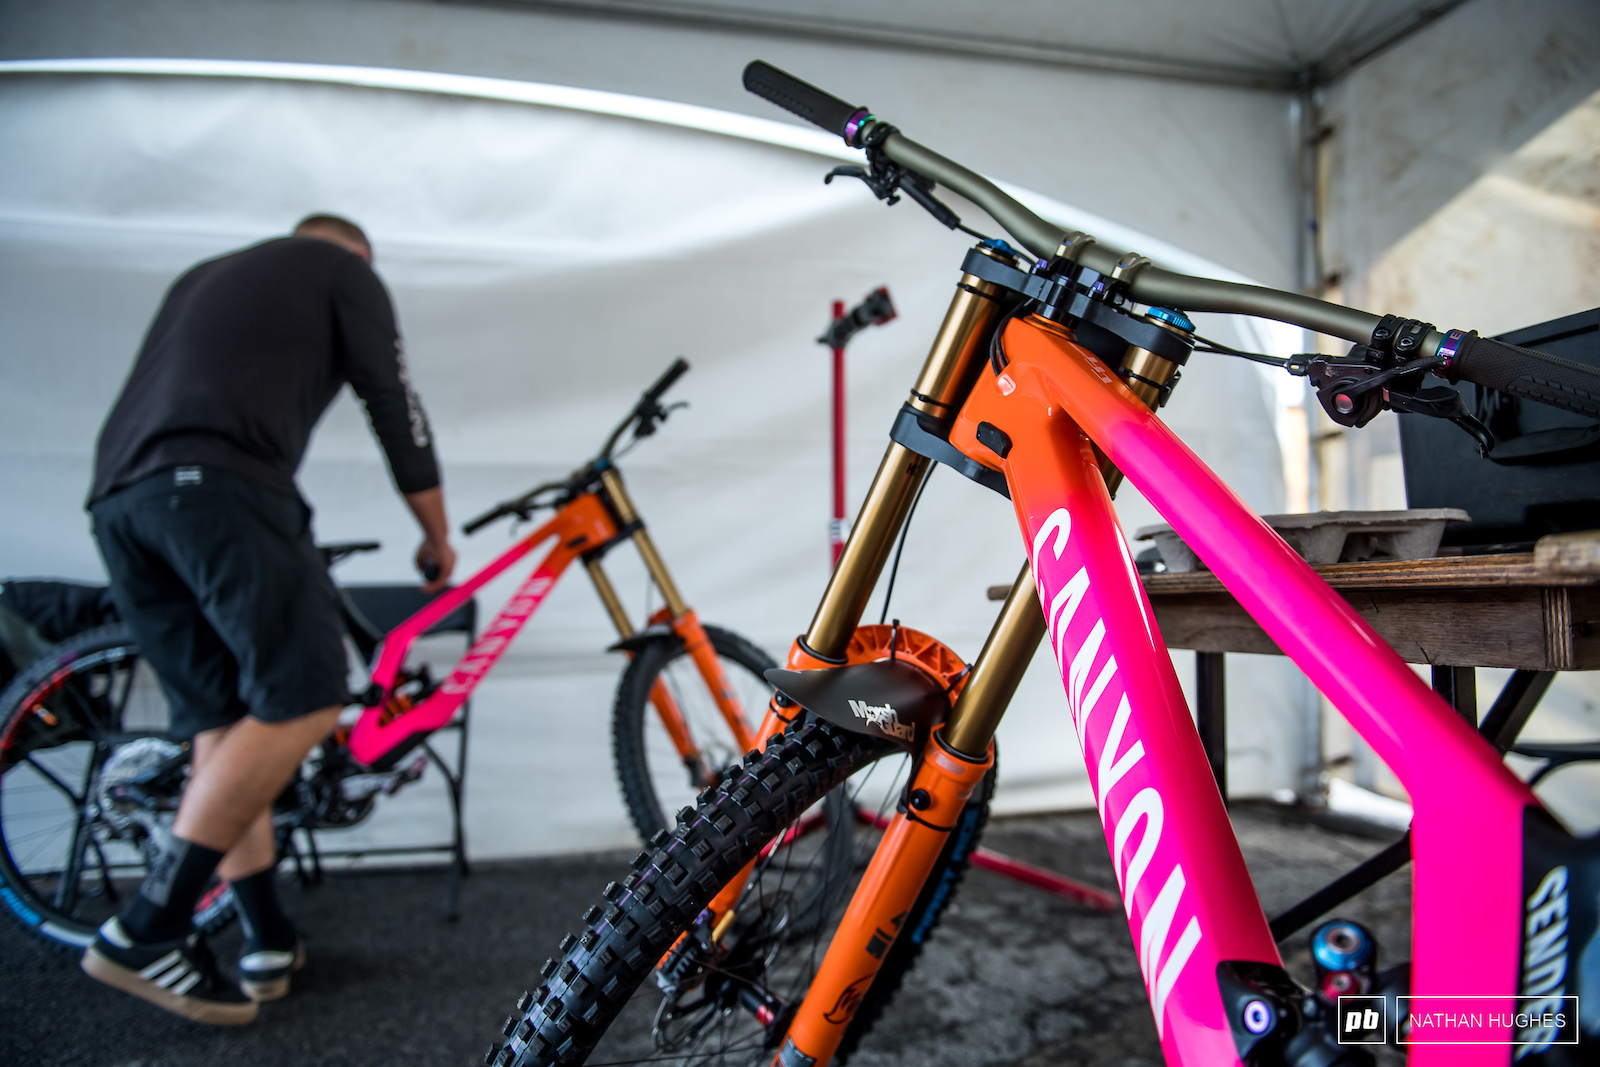 Take note Pinkbike and talk to FMD.